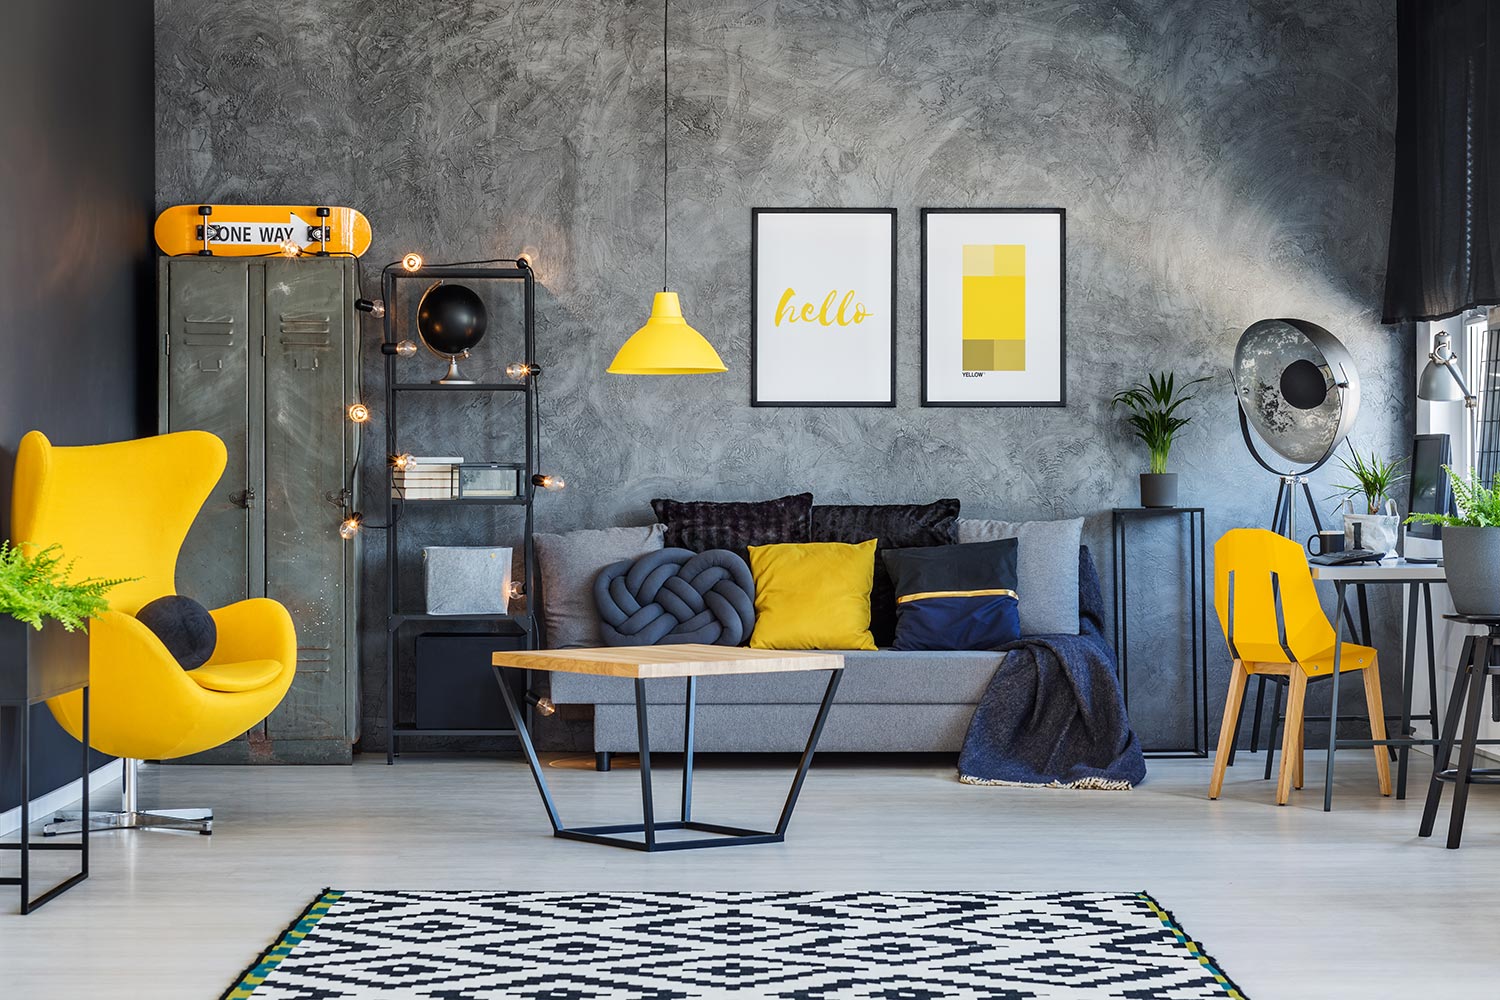 Yellow decor and accents in modern room interior for teenager